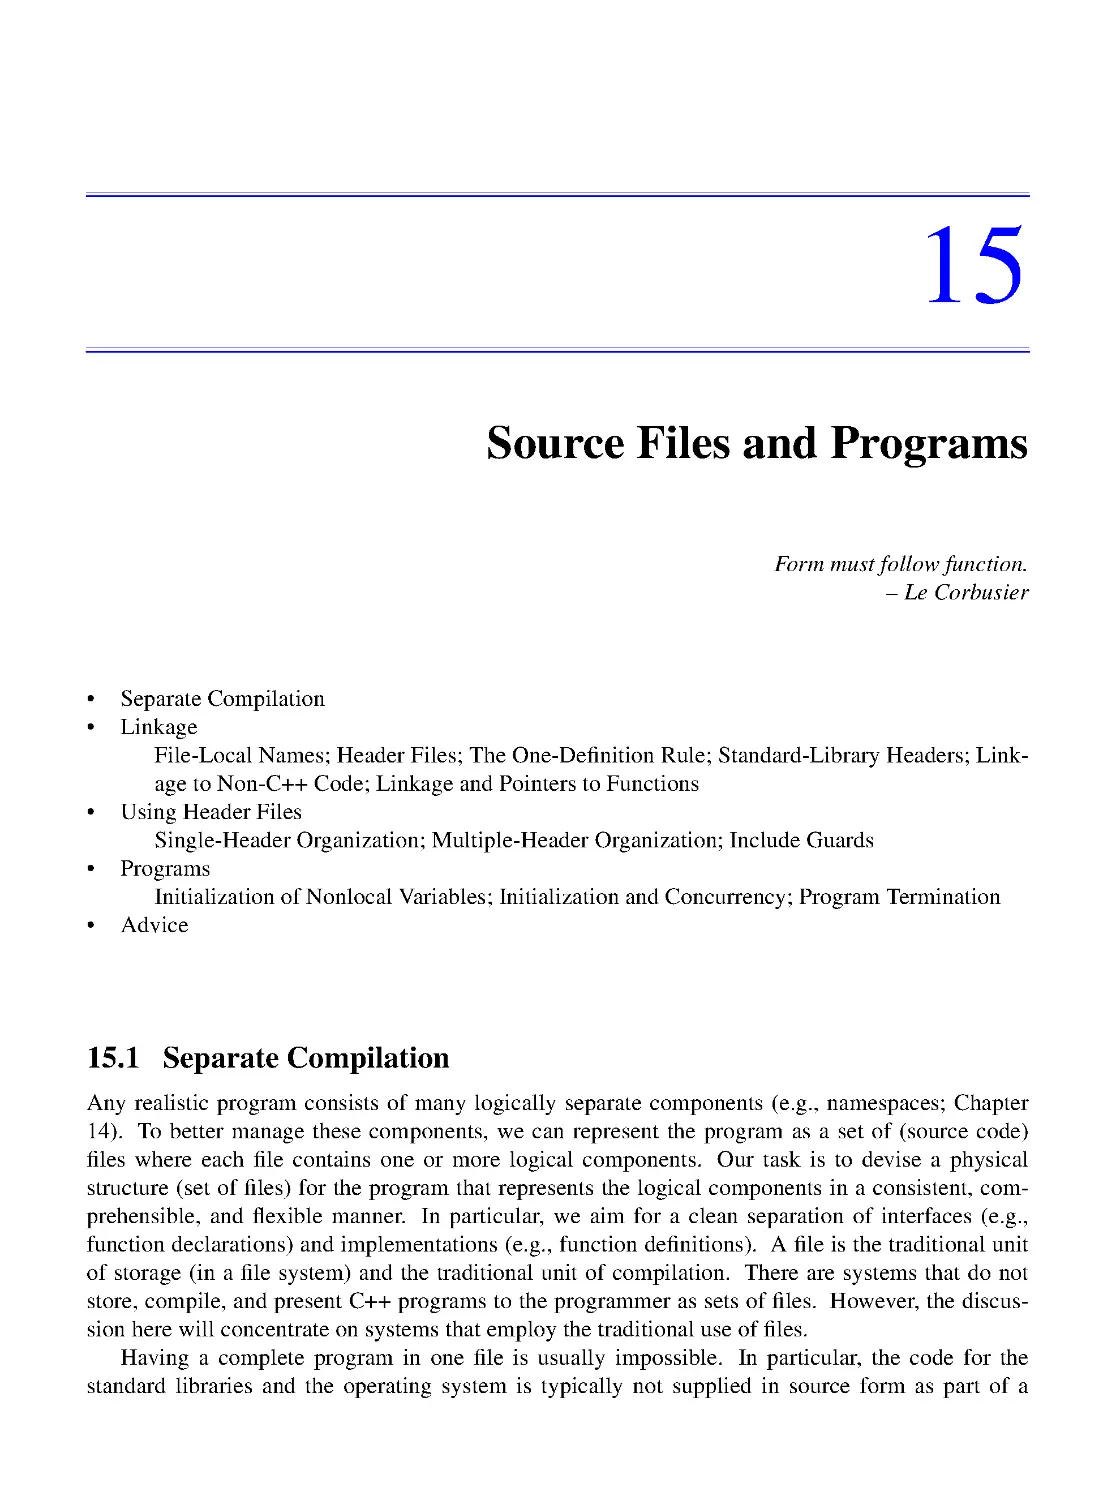 15. Source Files and Programs